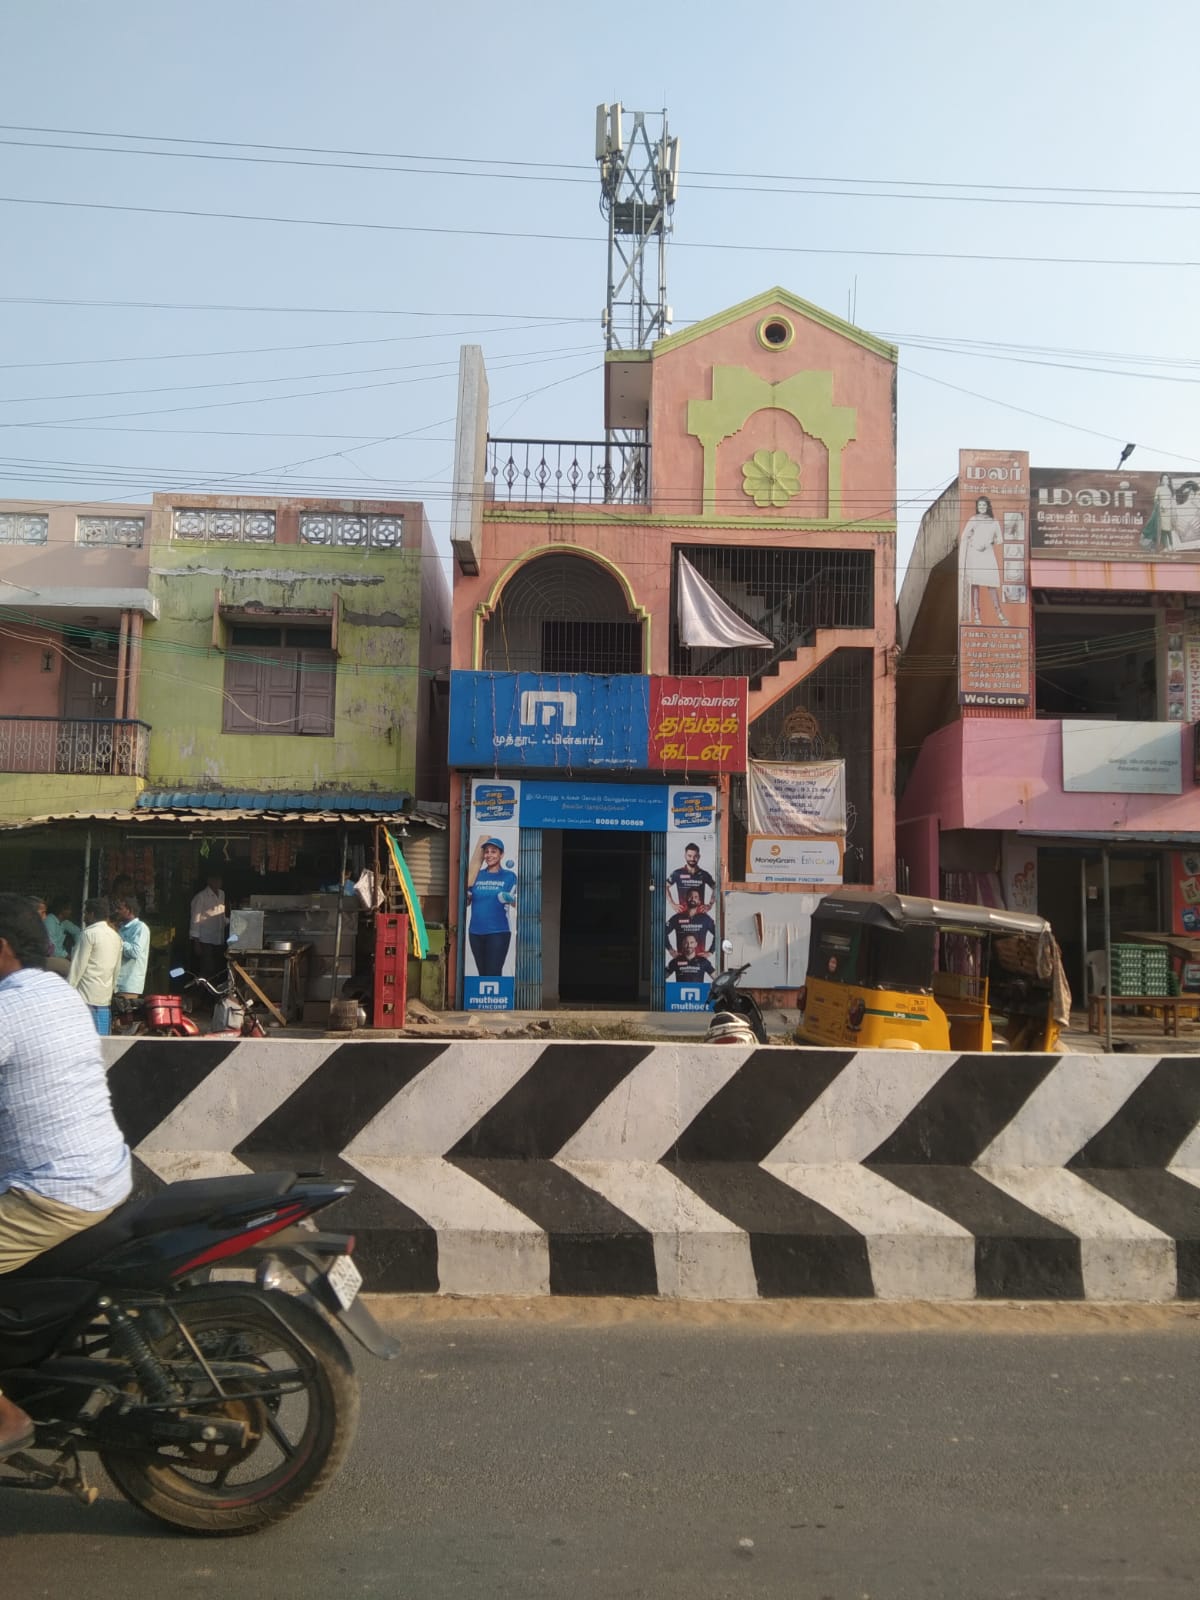 Photos and Videos of Muthoot Fincorp Gold Loan in Thiruvanthipuram Main Road, Cuddalore